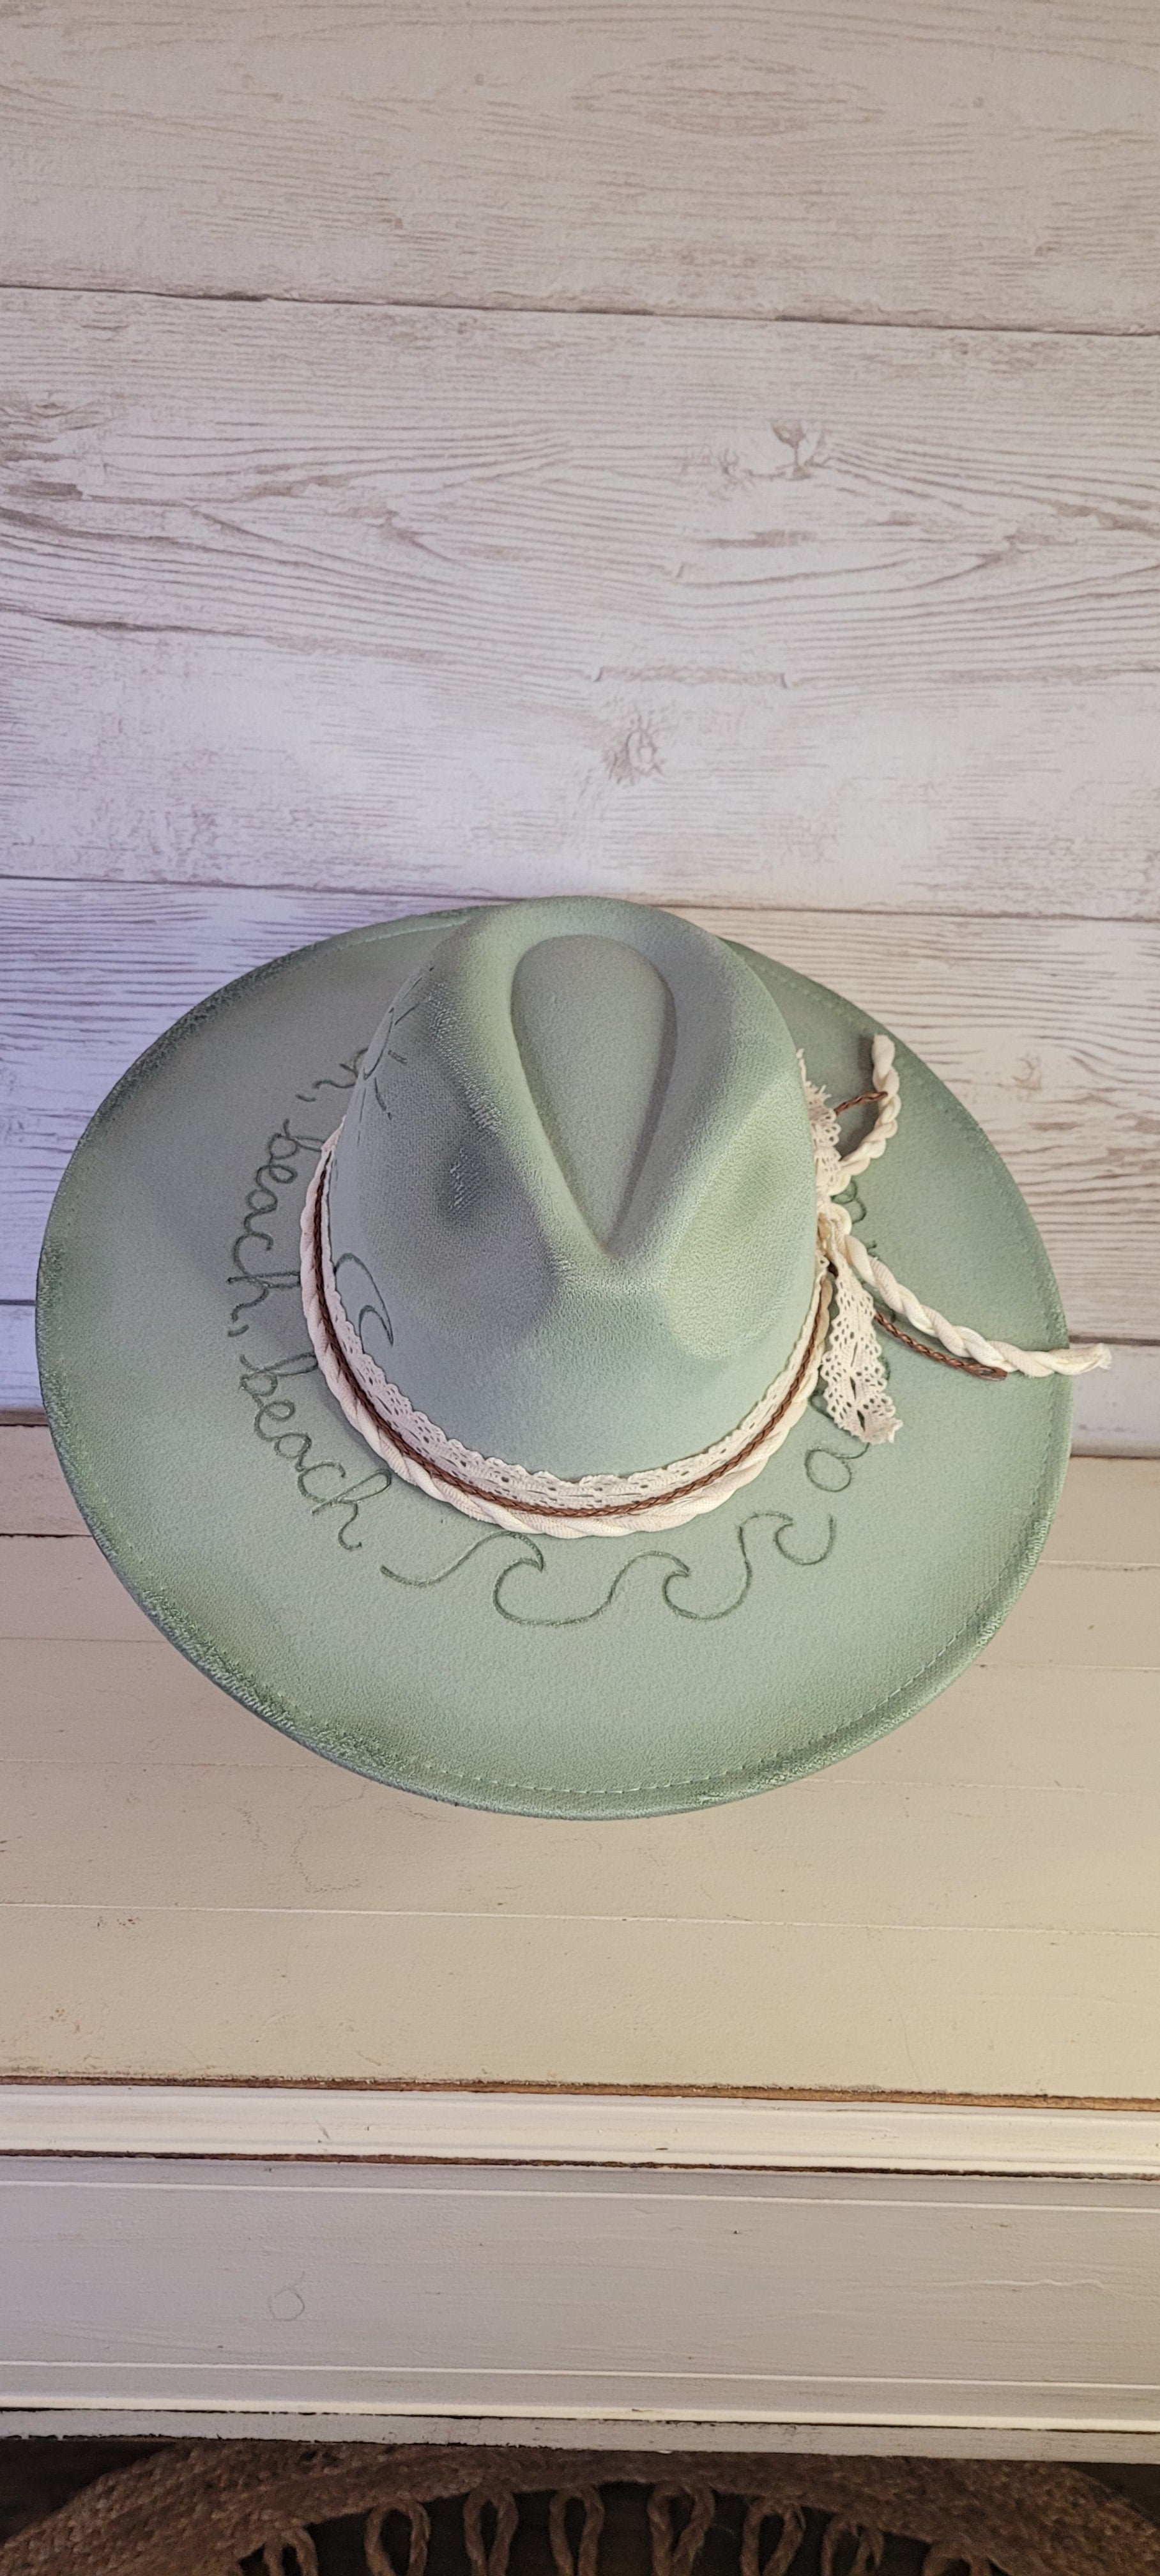 Features sunshine, palm trees, waves & "all she does is beach, beach, beach" engraved Lace ribbon, brown cord, & natural gauze rope Felt hat Flat brim 65% polyester and 35% cotton Ribbon drawstring for hat size adjustment Head Circumference: 24" Crown Height: 5" Brim Length: 15.75" Brim Width: 14.5" Branded & numbered inside crown Custom burned & engraved by Kayla